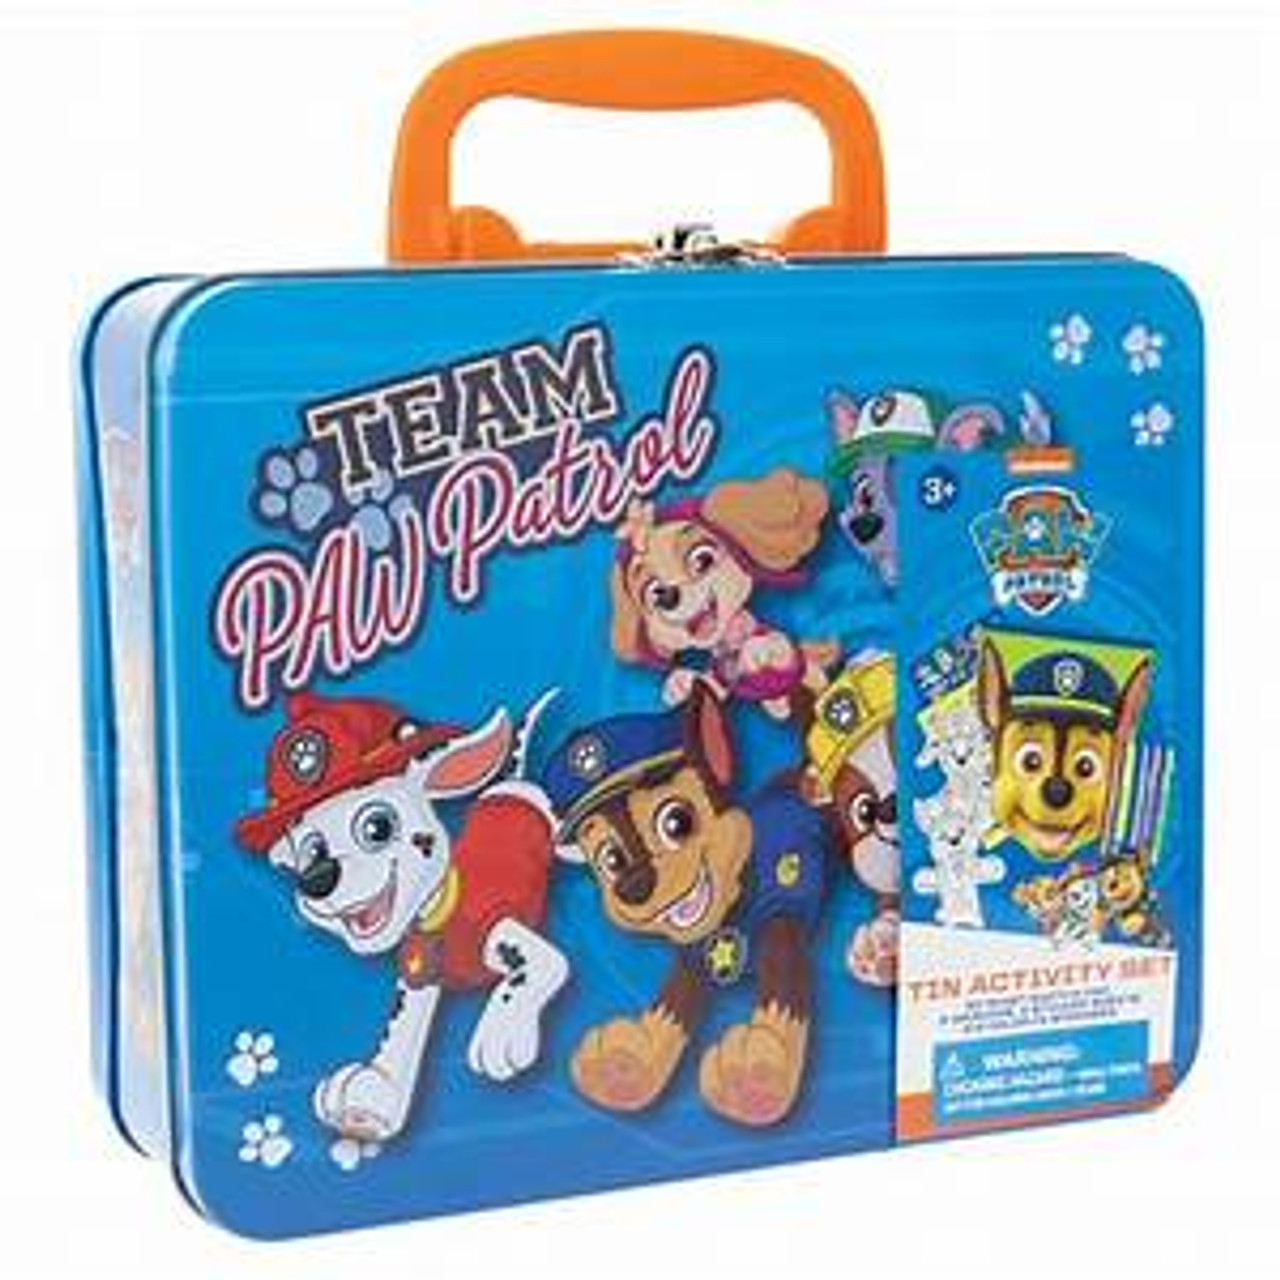 PAW PATROL RECTANGLE TIN WITH STATIONERY